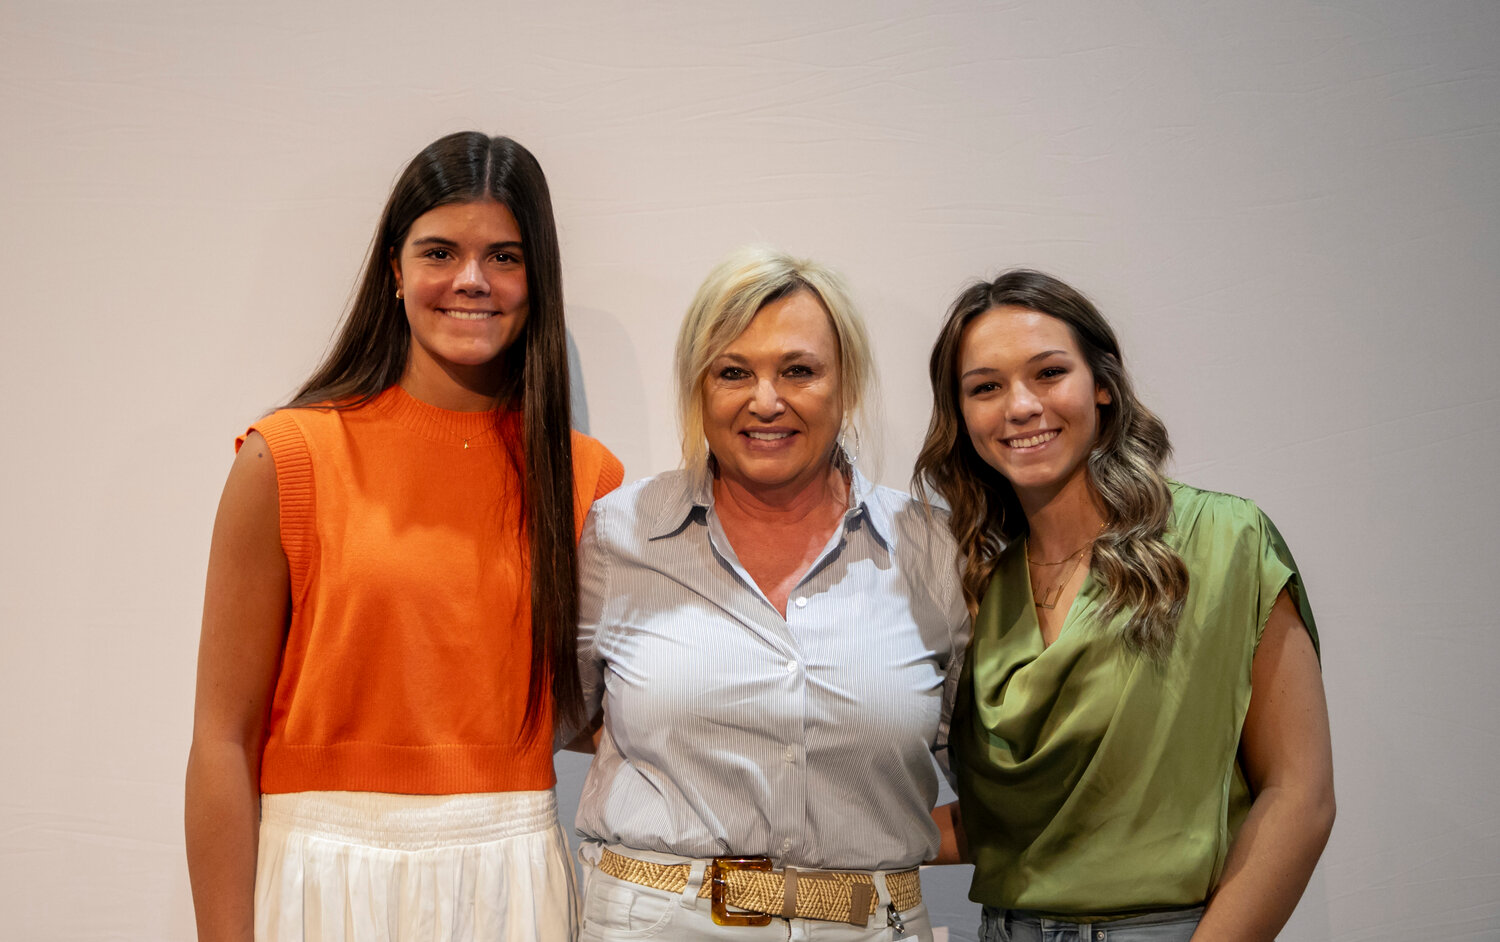 Amelia Edgeworth, head coach Karen Atkins and Ensley Keel came from Orange Beach to represent the Makos at Volleyball Media Day in Daphne on Monday, Aug. 7. As AHSAA teams officially opened practice the same day, local squads converged on Daphne High School to preview the campaign.